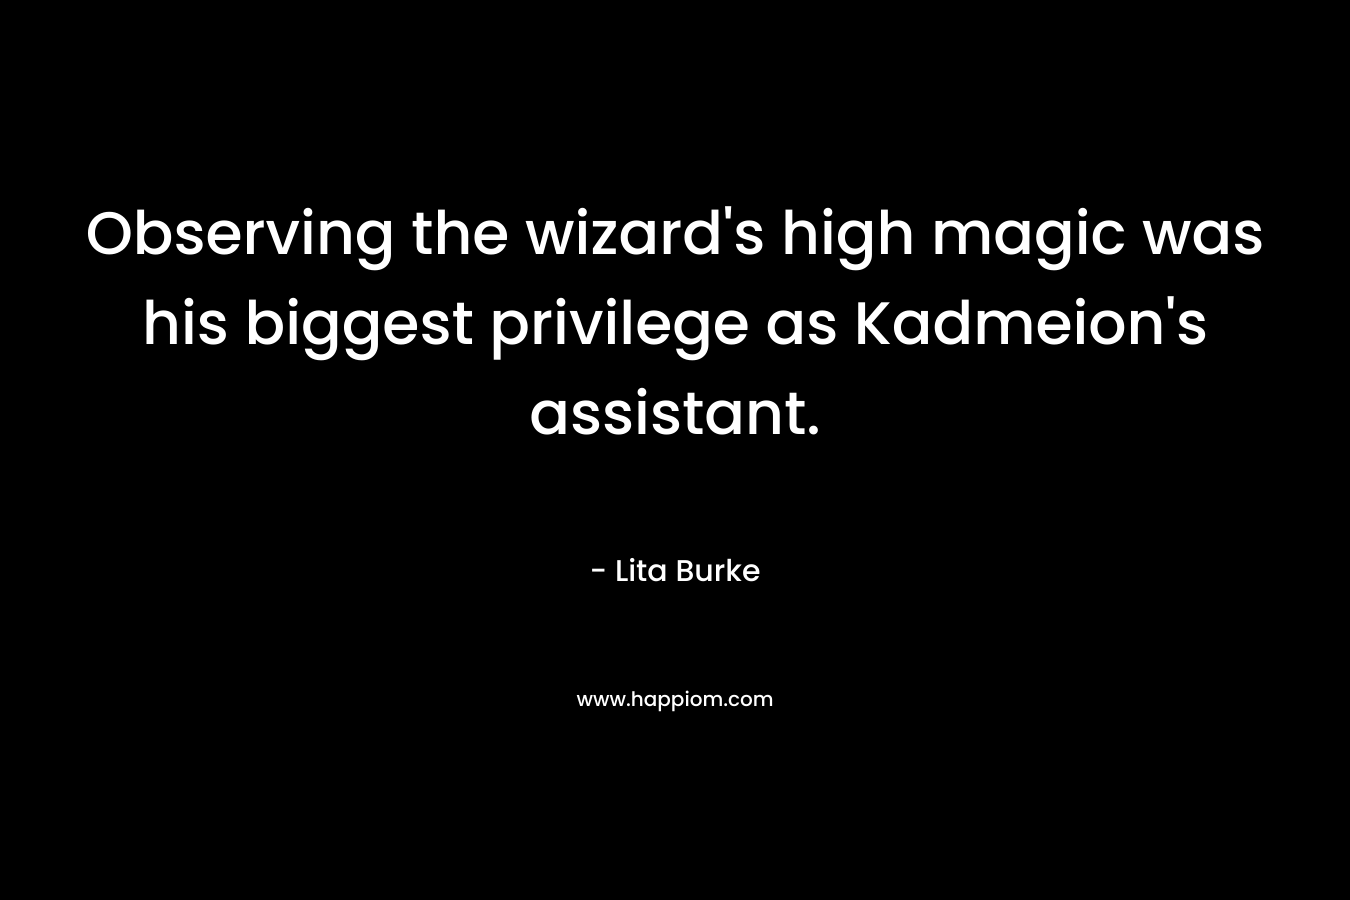 Observing the wizard’s high magic was his biggest privilege as Kadmeion’s assistant. – Lita Burke